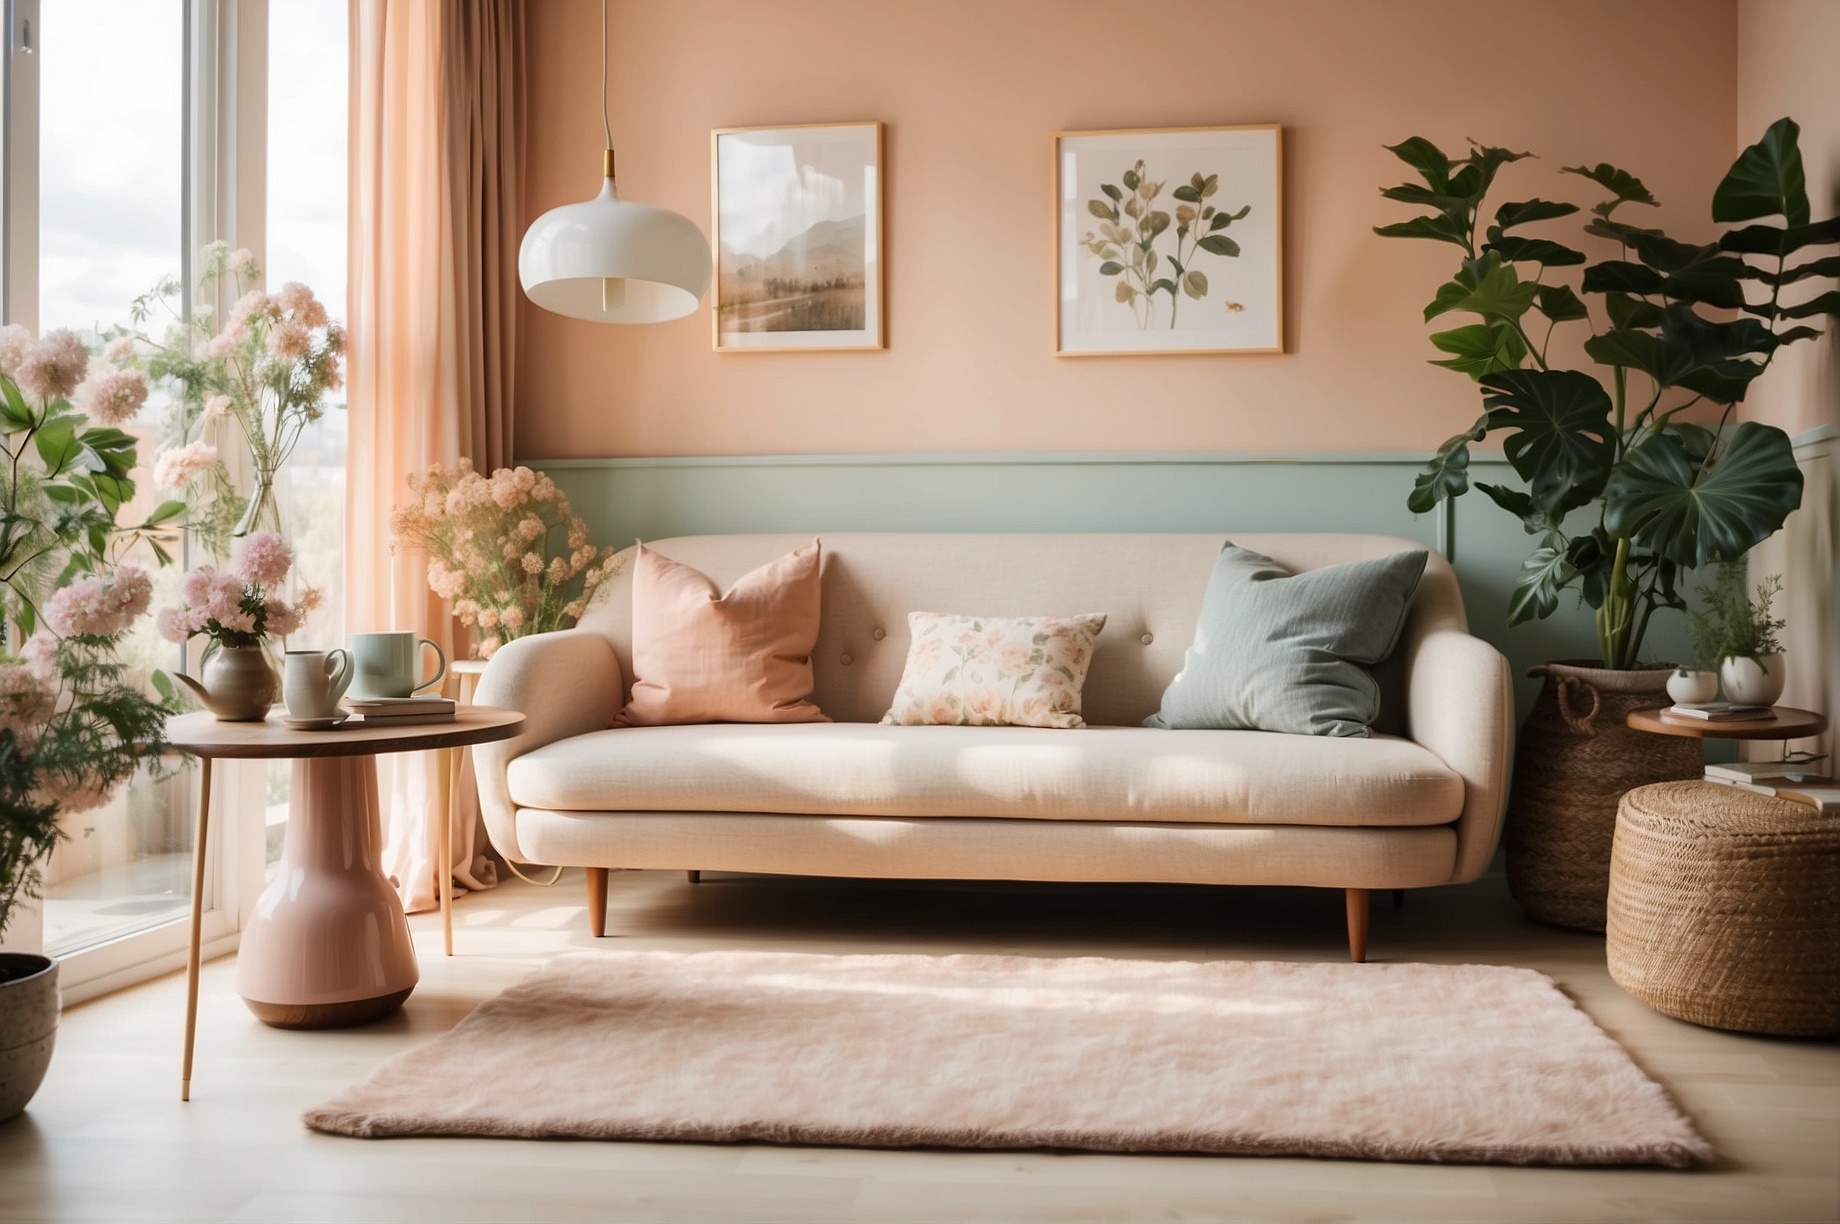 You are currently viewing Creating a Cozy and Chic Danish Pastel Room